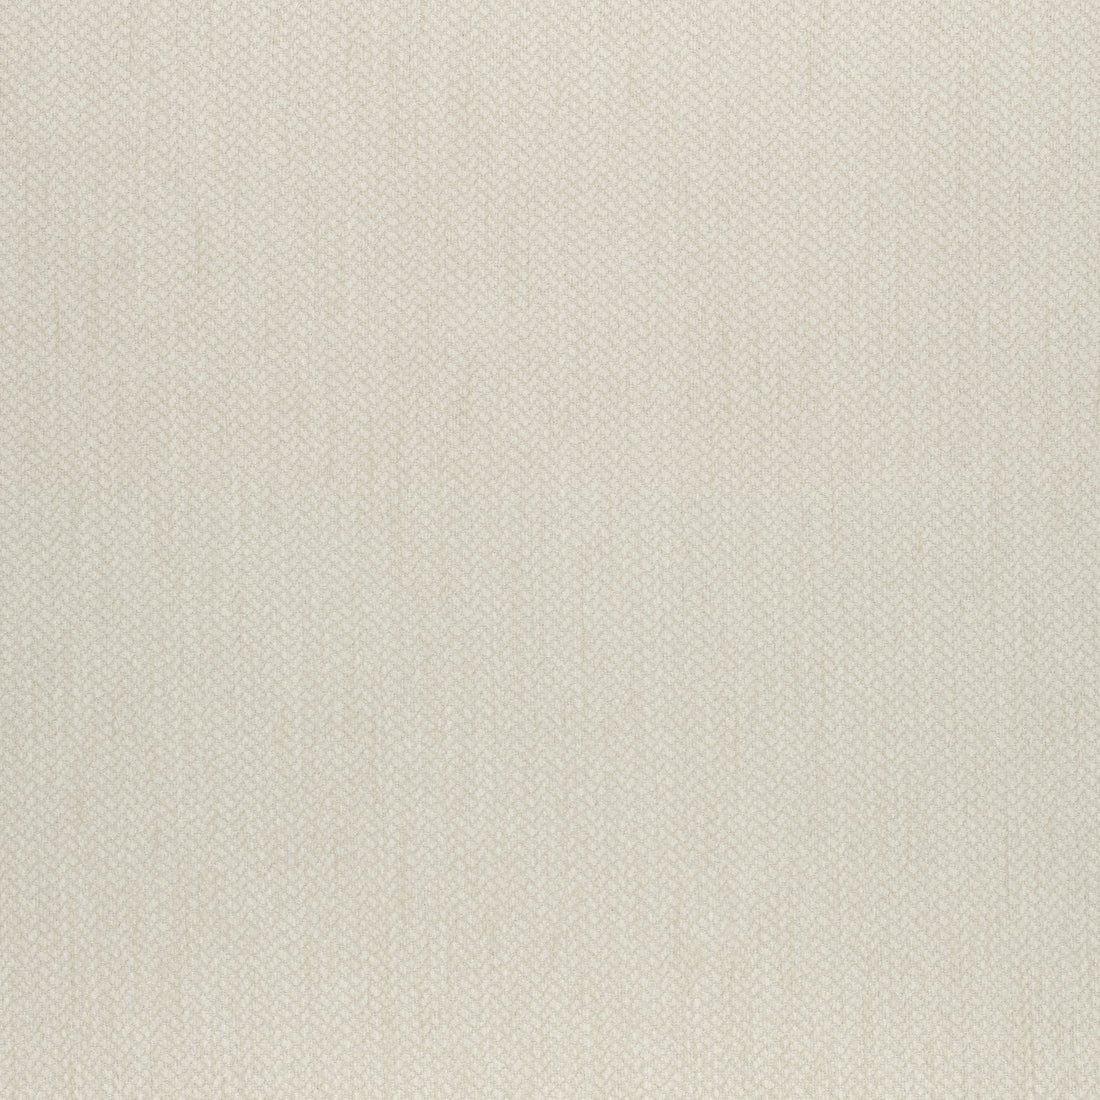 Orion fabric in flax color - pattern number W80472 - by Thibaut in the Mosaic collection